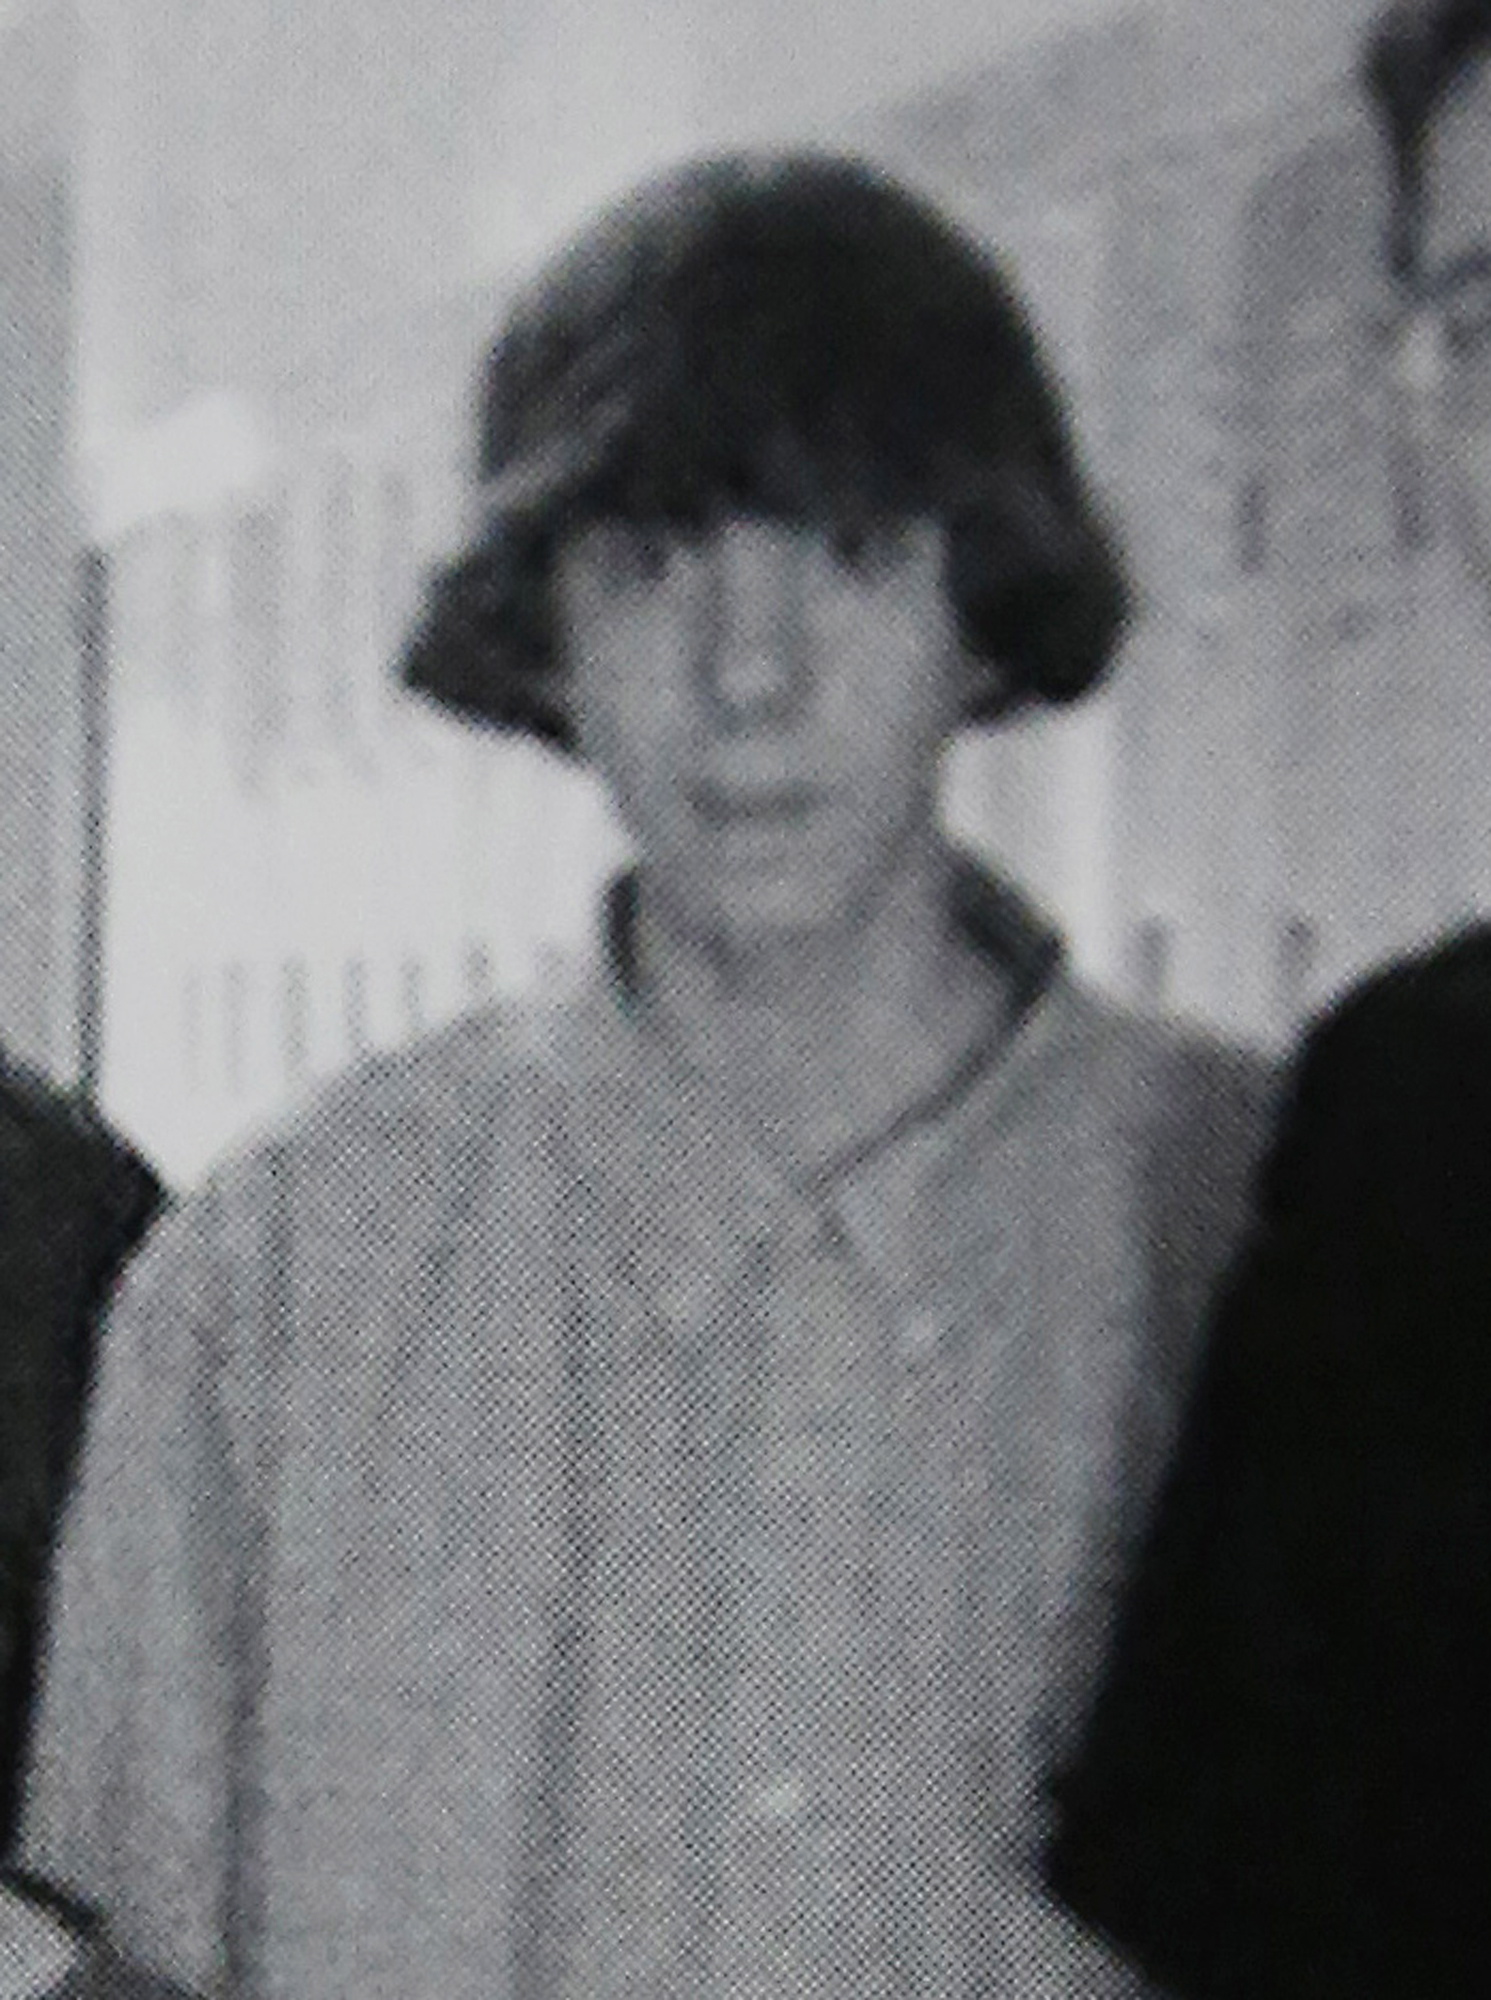 This undated photo shows Adam Lanza posing for a group photo of the technology club which appeared in the Newtown High School yearbook. Authorities have identified Lanza as the gunman who killed his mother at their home and then opened fire Friday, Dec. 14, 2012, inside an elementary school in Newtown, Conn., killing 26 people, including 20 children, before killing himself.  Richard Novia, a one-time adviser to the technology club, verified that the photo shows Lanza.